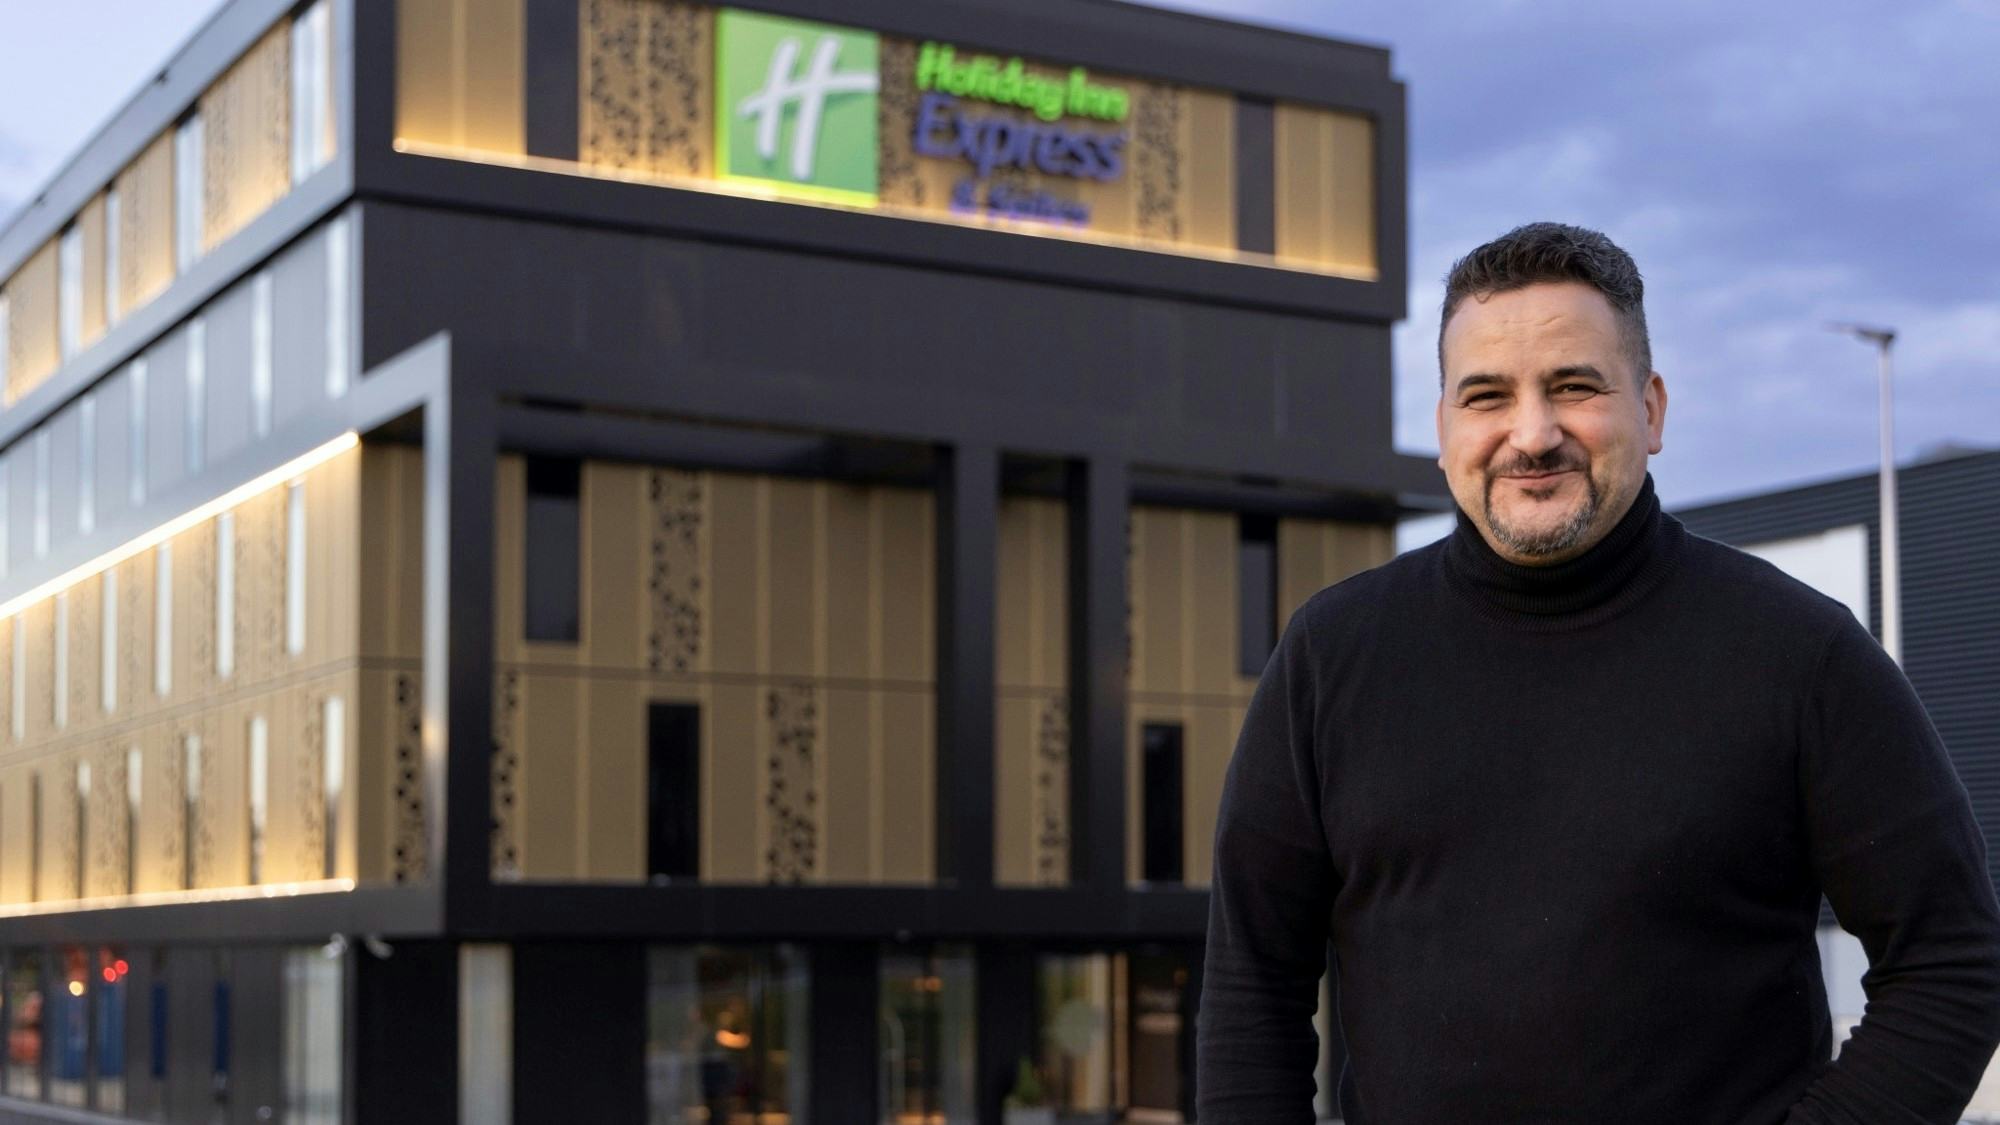 Cycas opent dualbranded Holiday Inn Express & Suites in Deventer